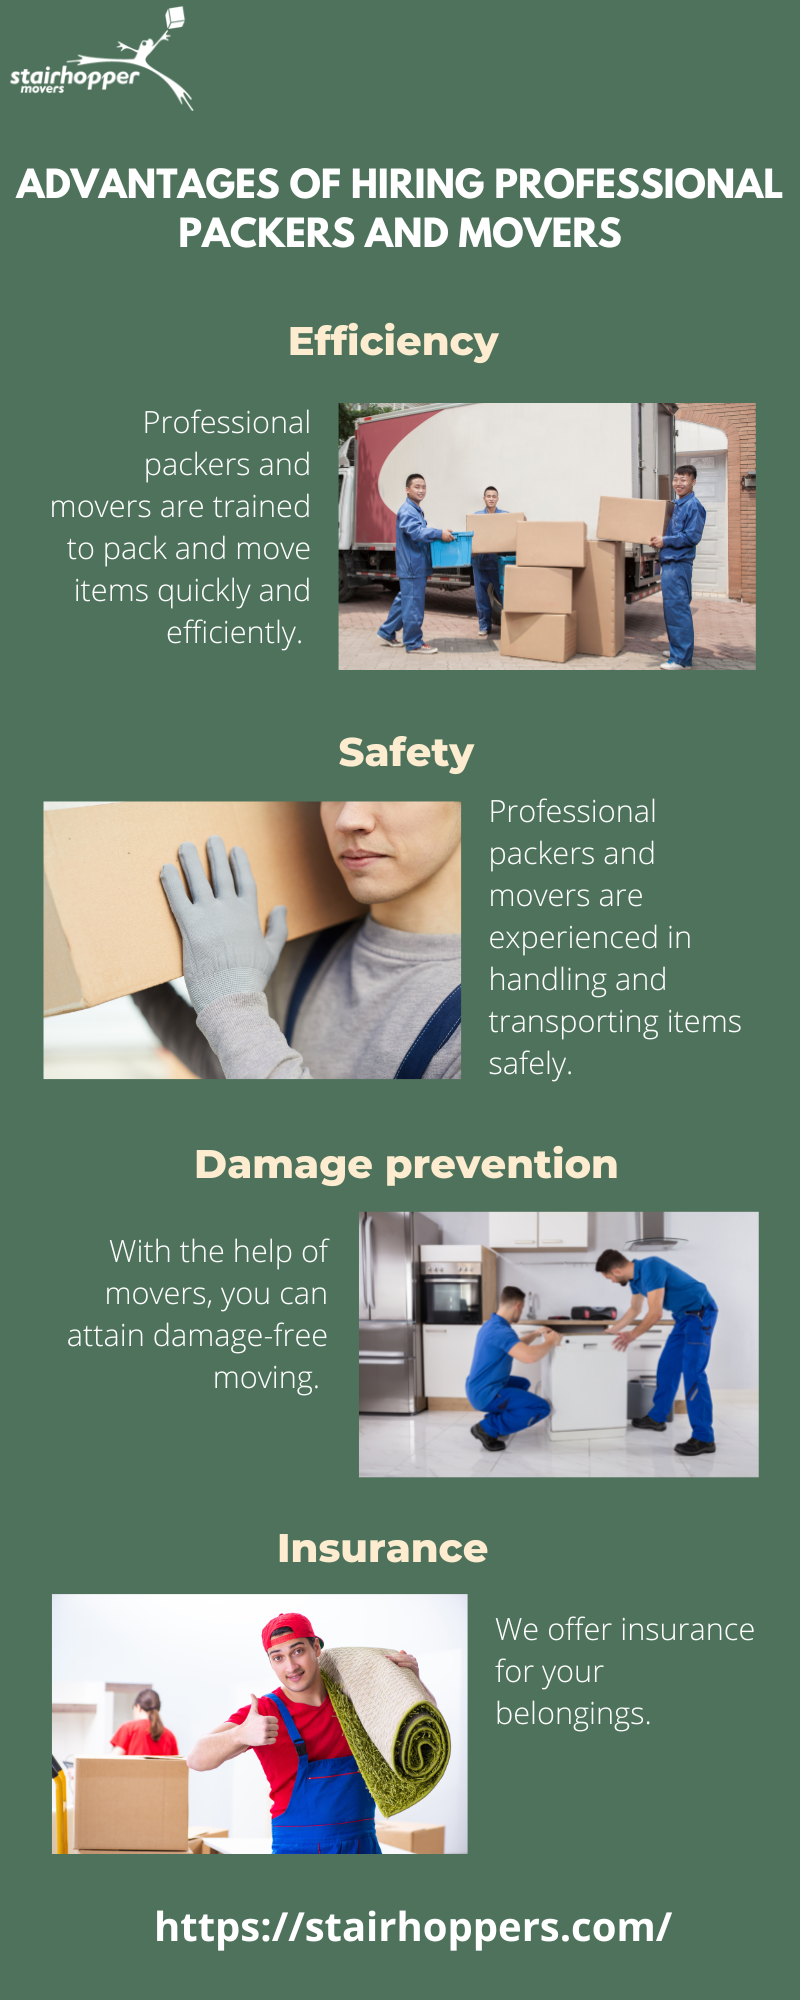 Advantages of Hiring Professional Packers and Movers